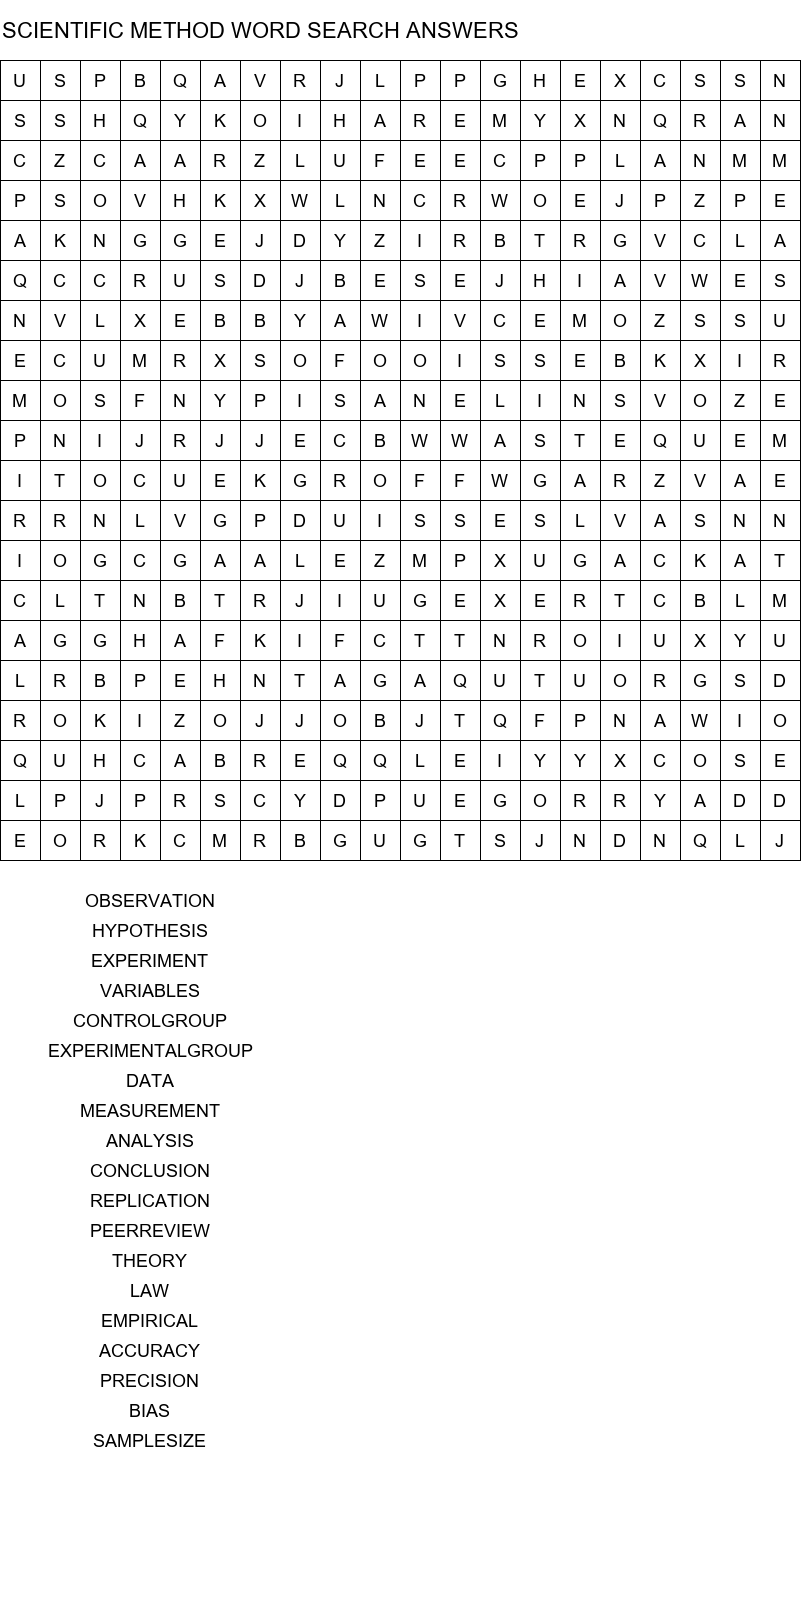 scientific method word search answers size 20x20